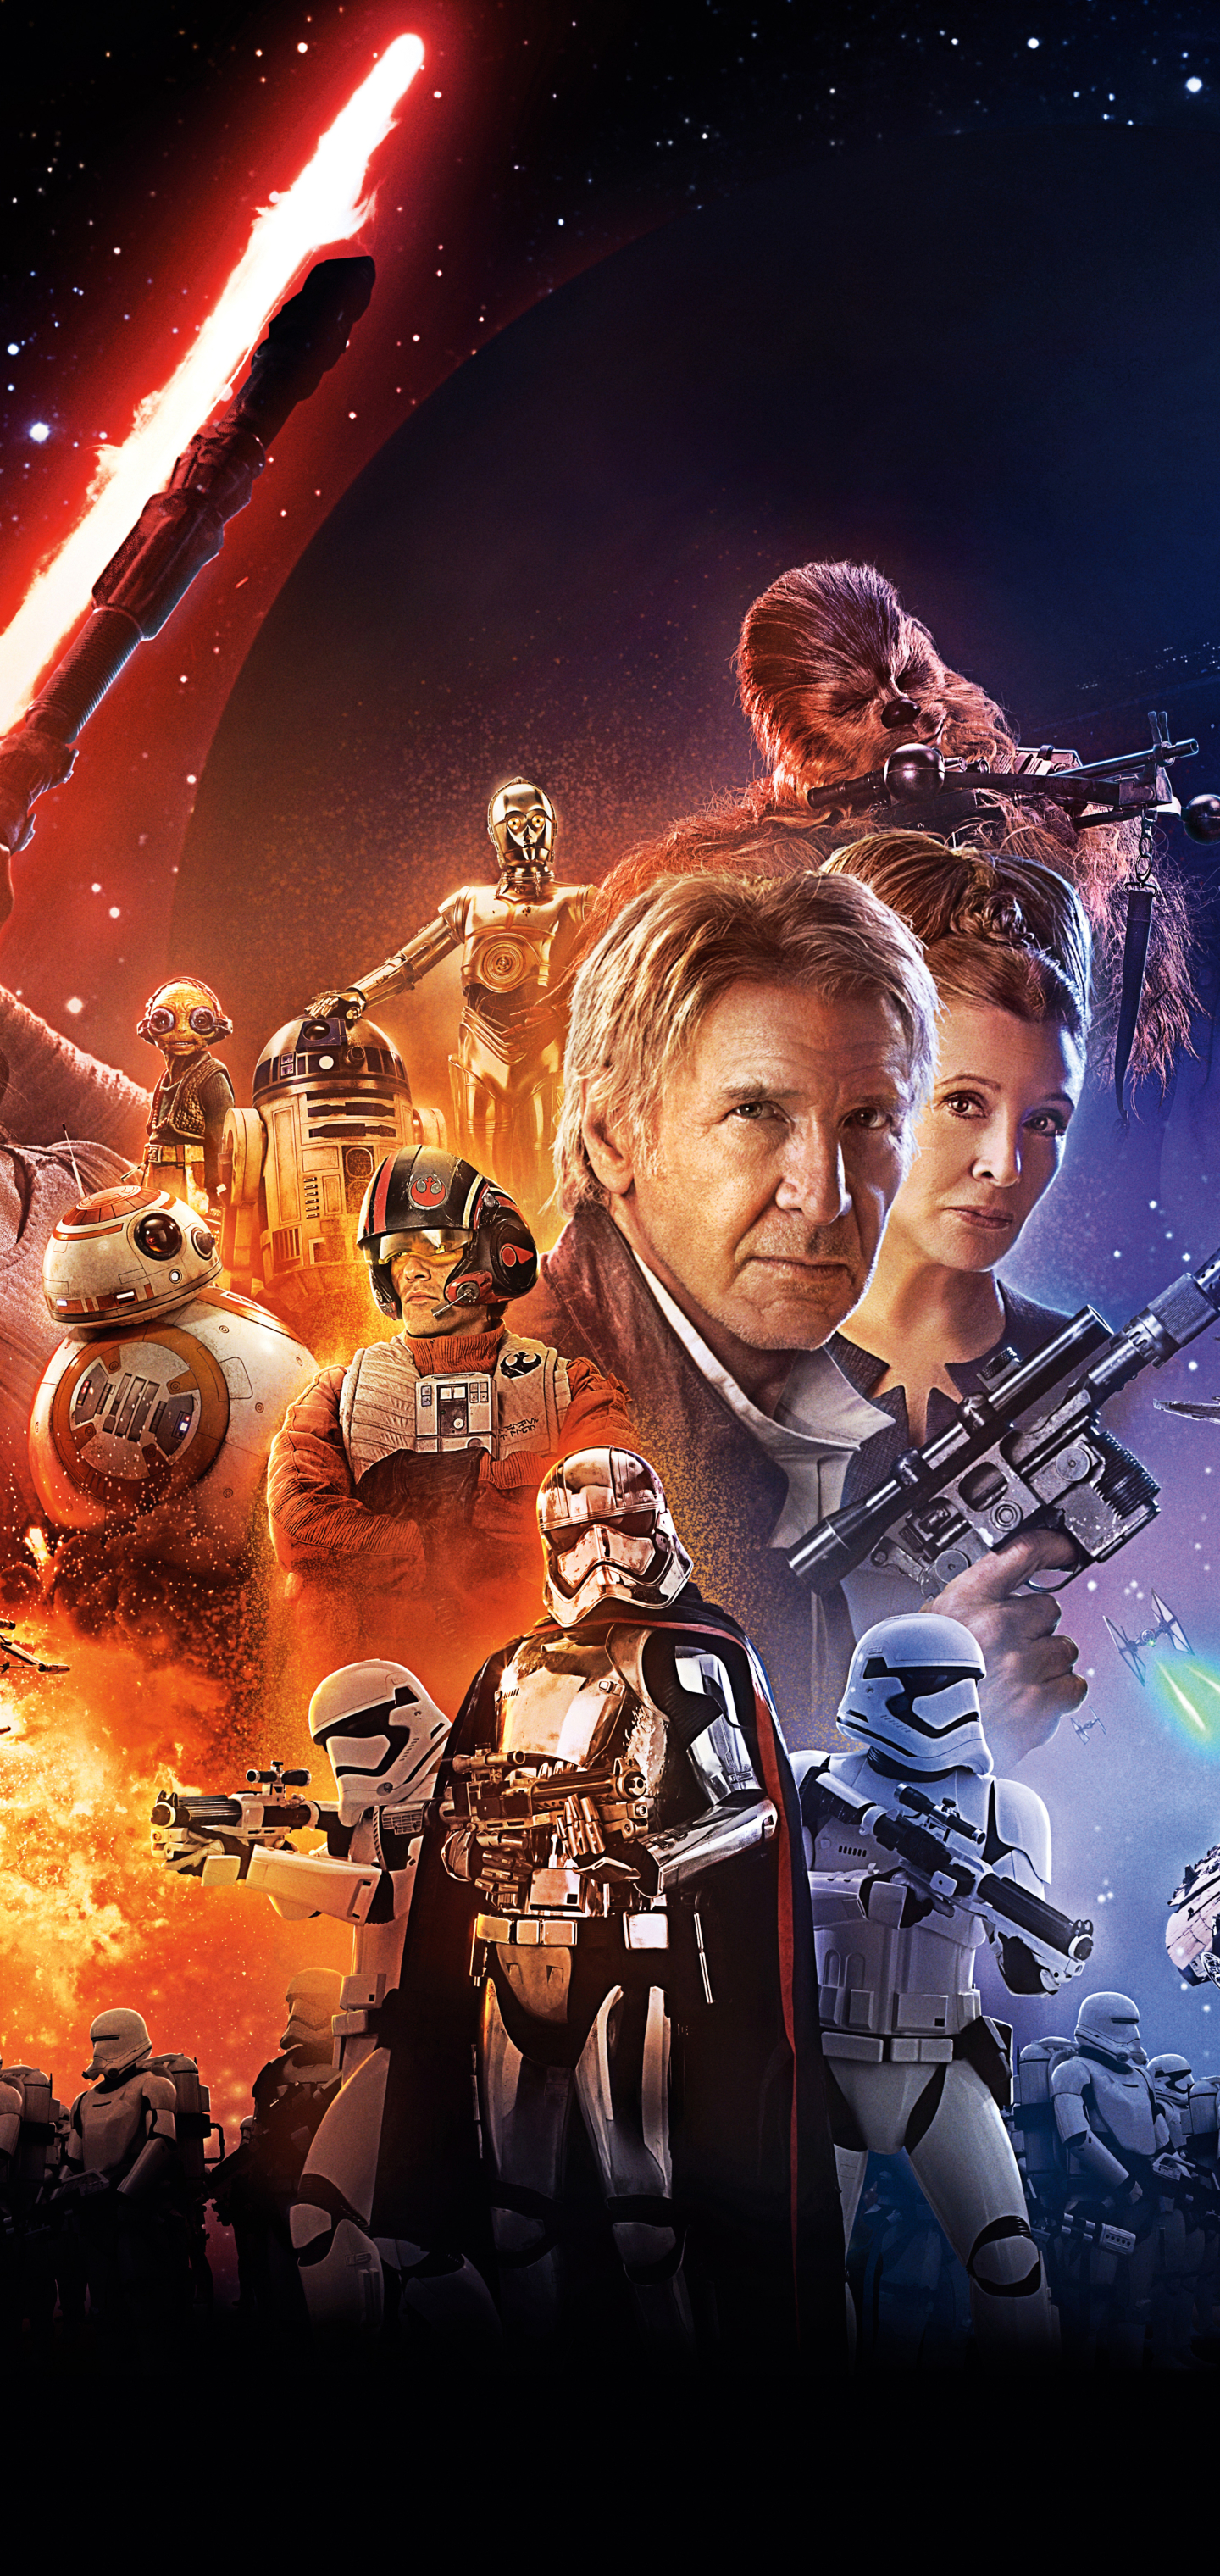 Free download wallpaper Star Wars, Movie, R2 D2, Chewbacca, Han Solo, Princess Leia, Star Wars Episode Vii: The Force Awakens, Bb 8, Captain Phasma on your PC desktop